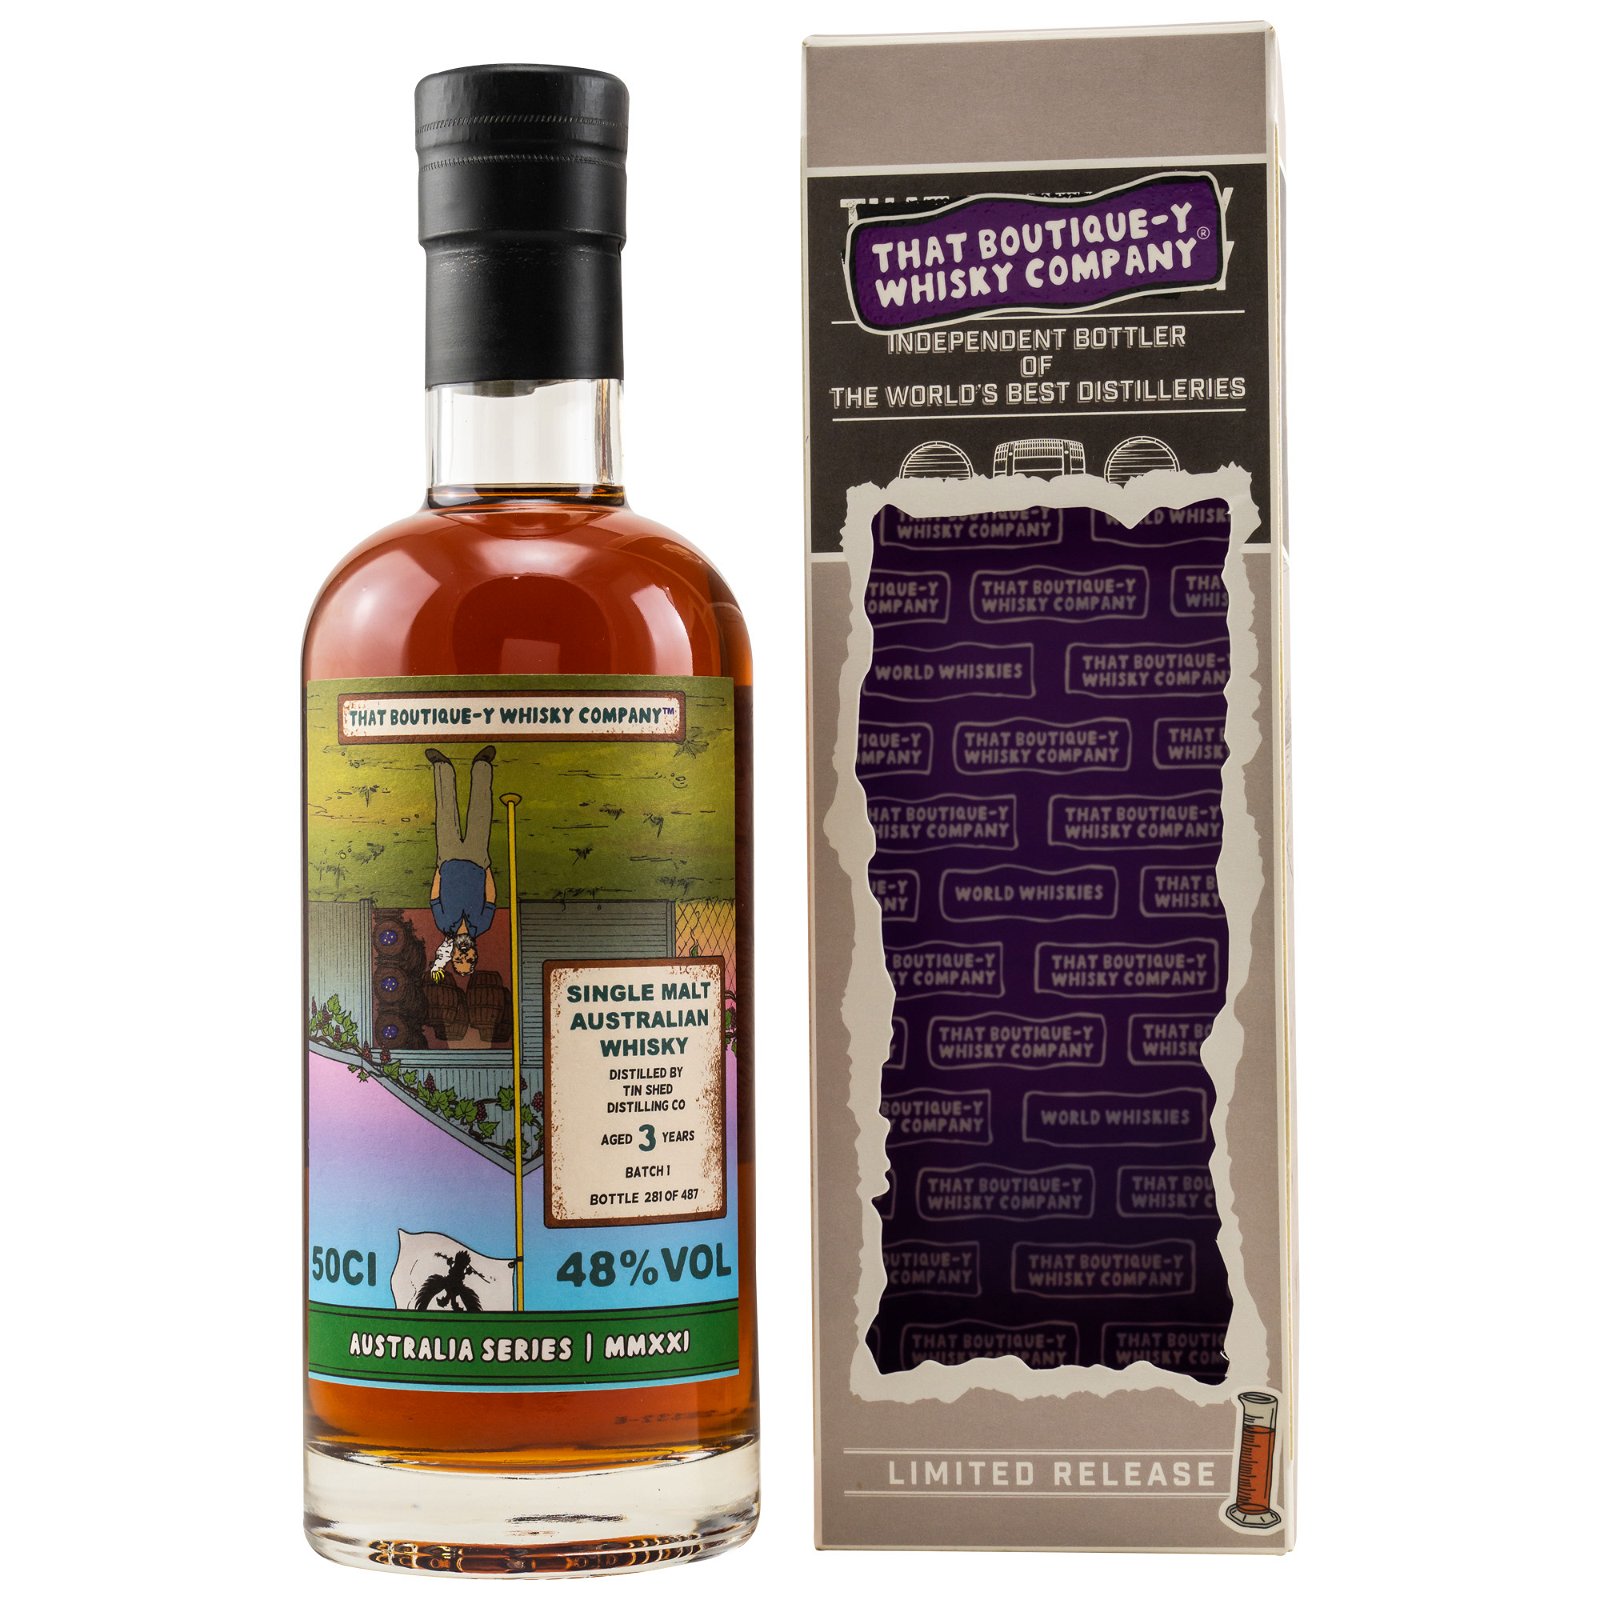 Tin Shed Distilling Co 3 Jahre Australian Whisky Batch No. 1 (That Boutique-y Whisky Company) 